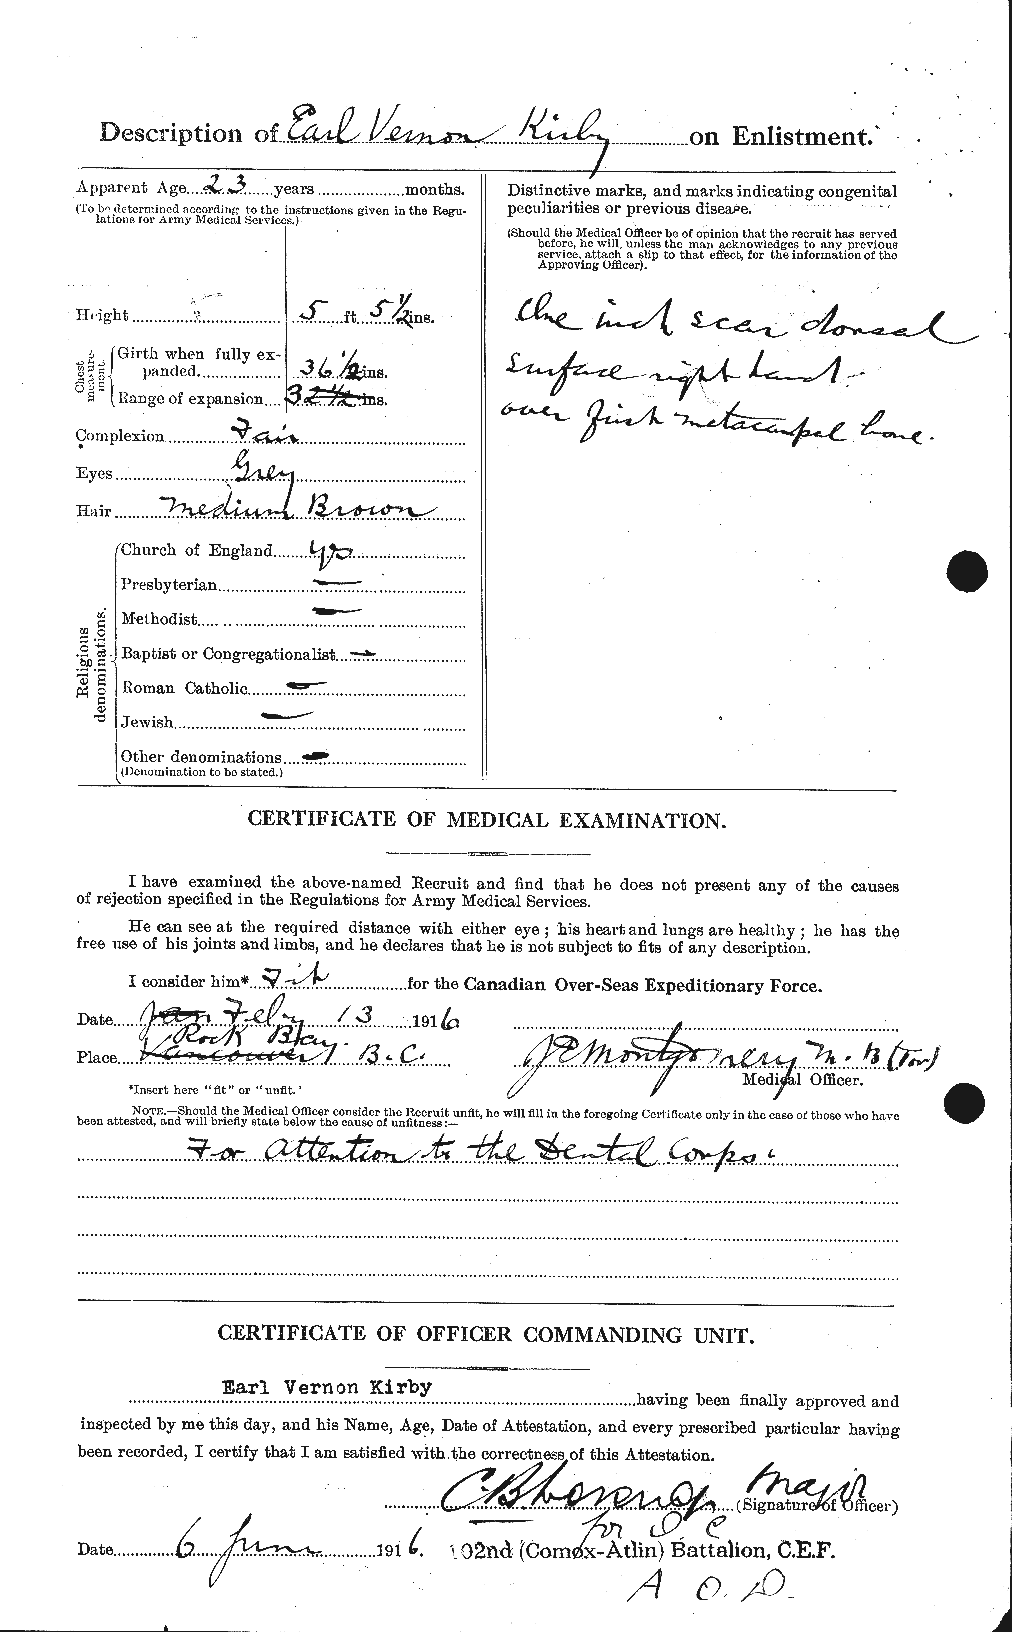 Personnel Records of the First World War - CEF 437176b